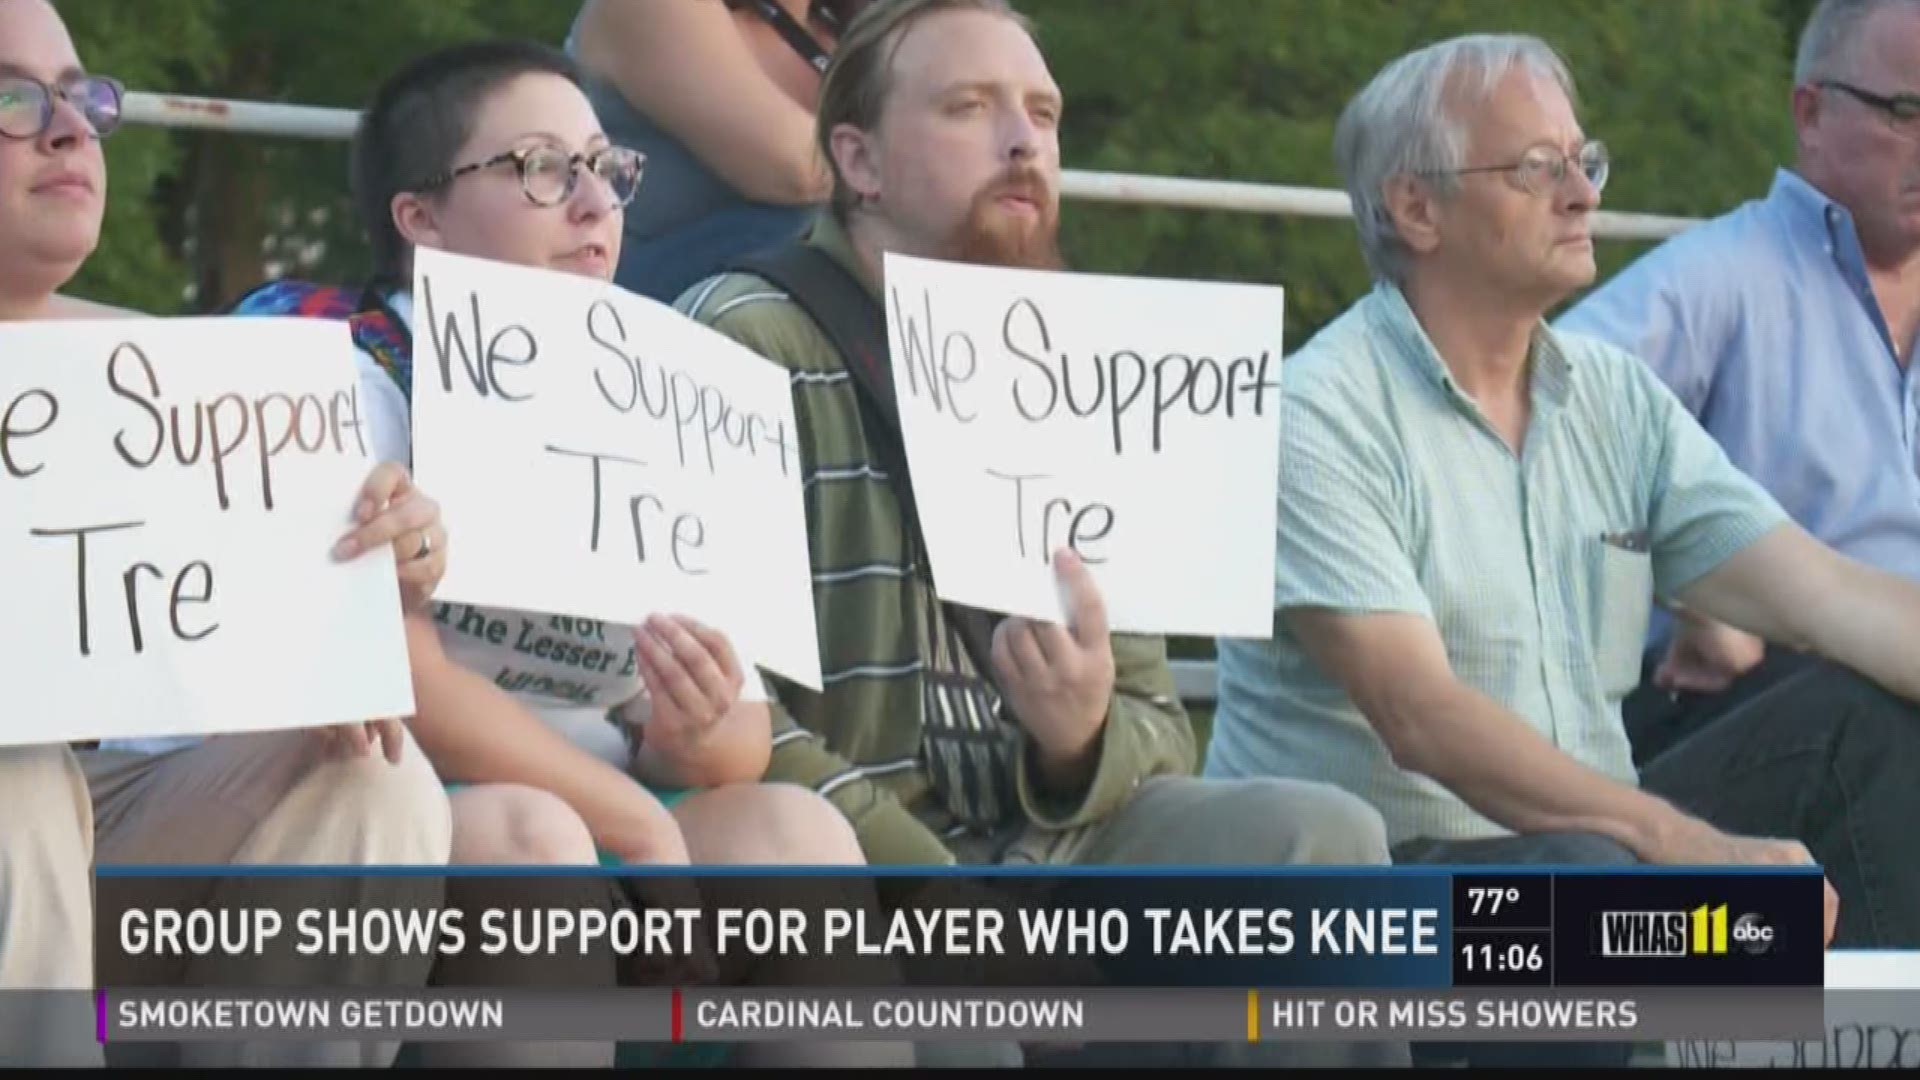 Group shows support for player who takes knee